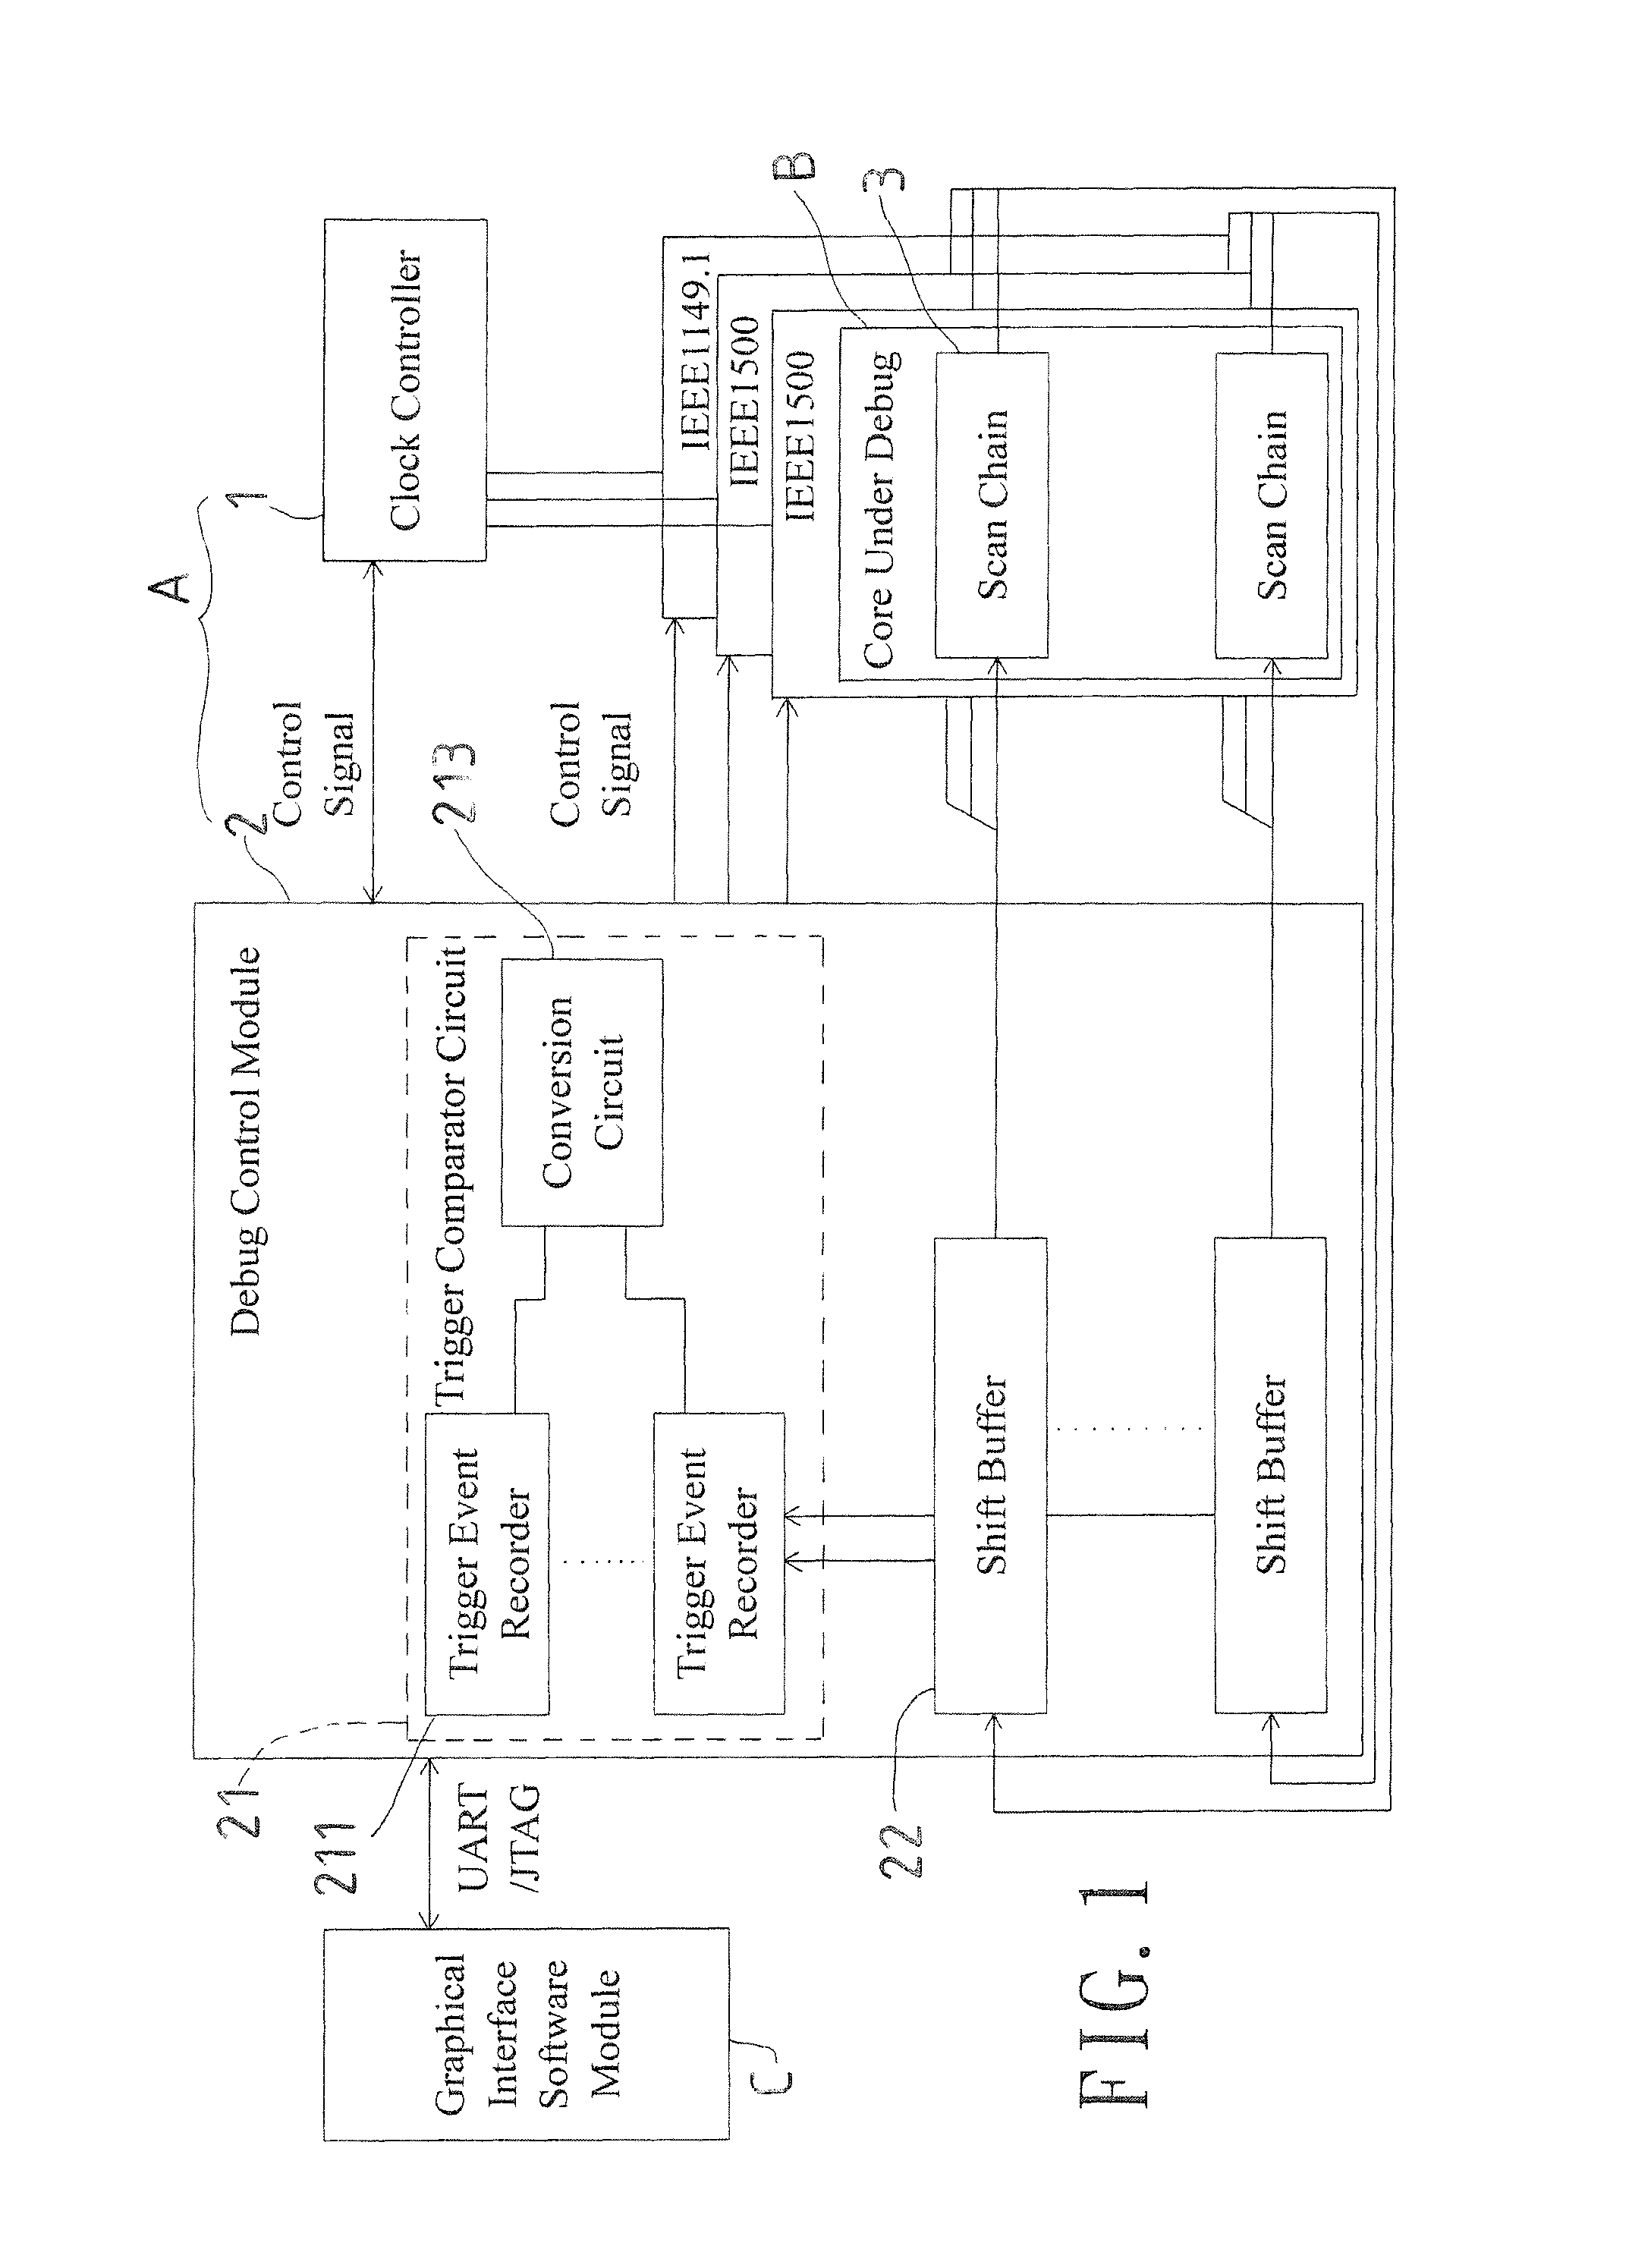 Debugging control system using inside core event as trigger condition and method of the same